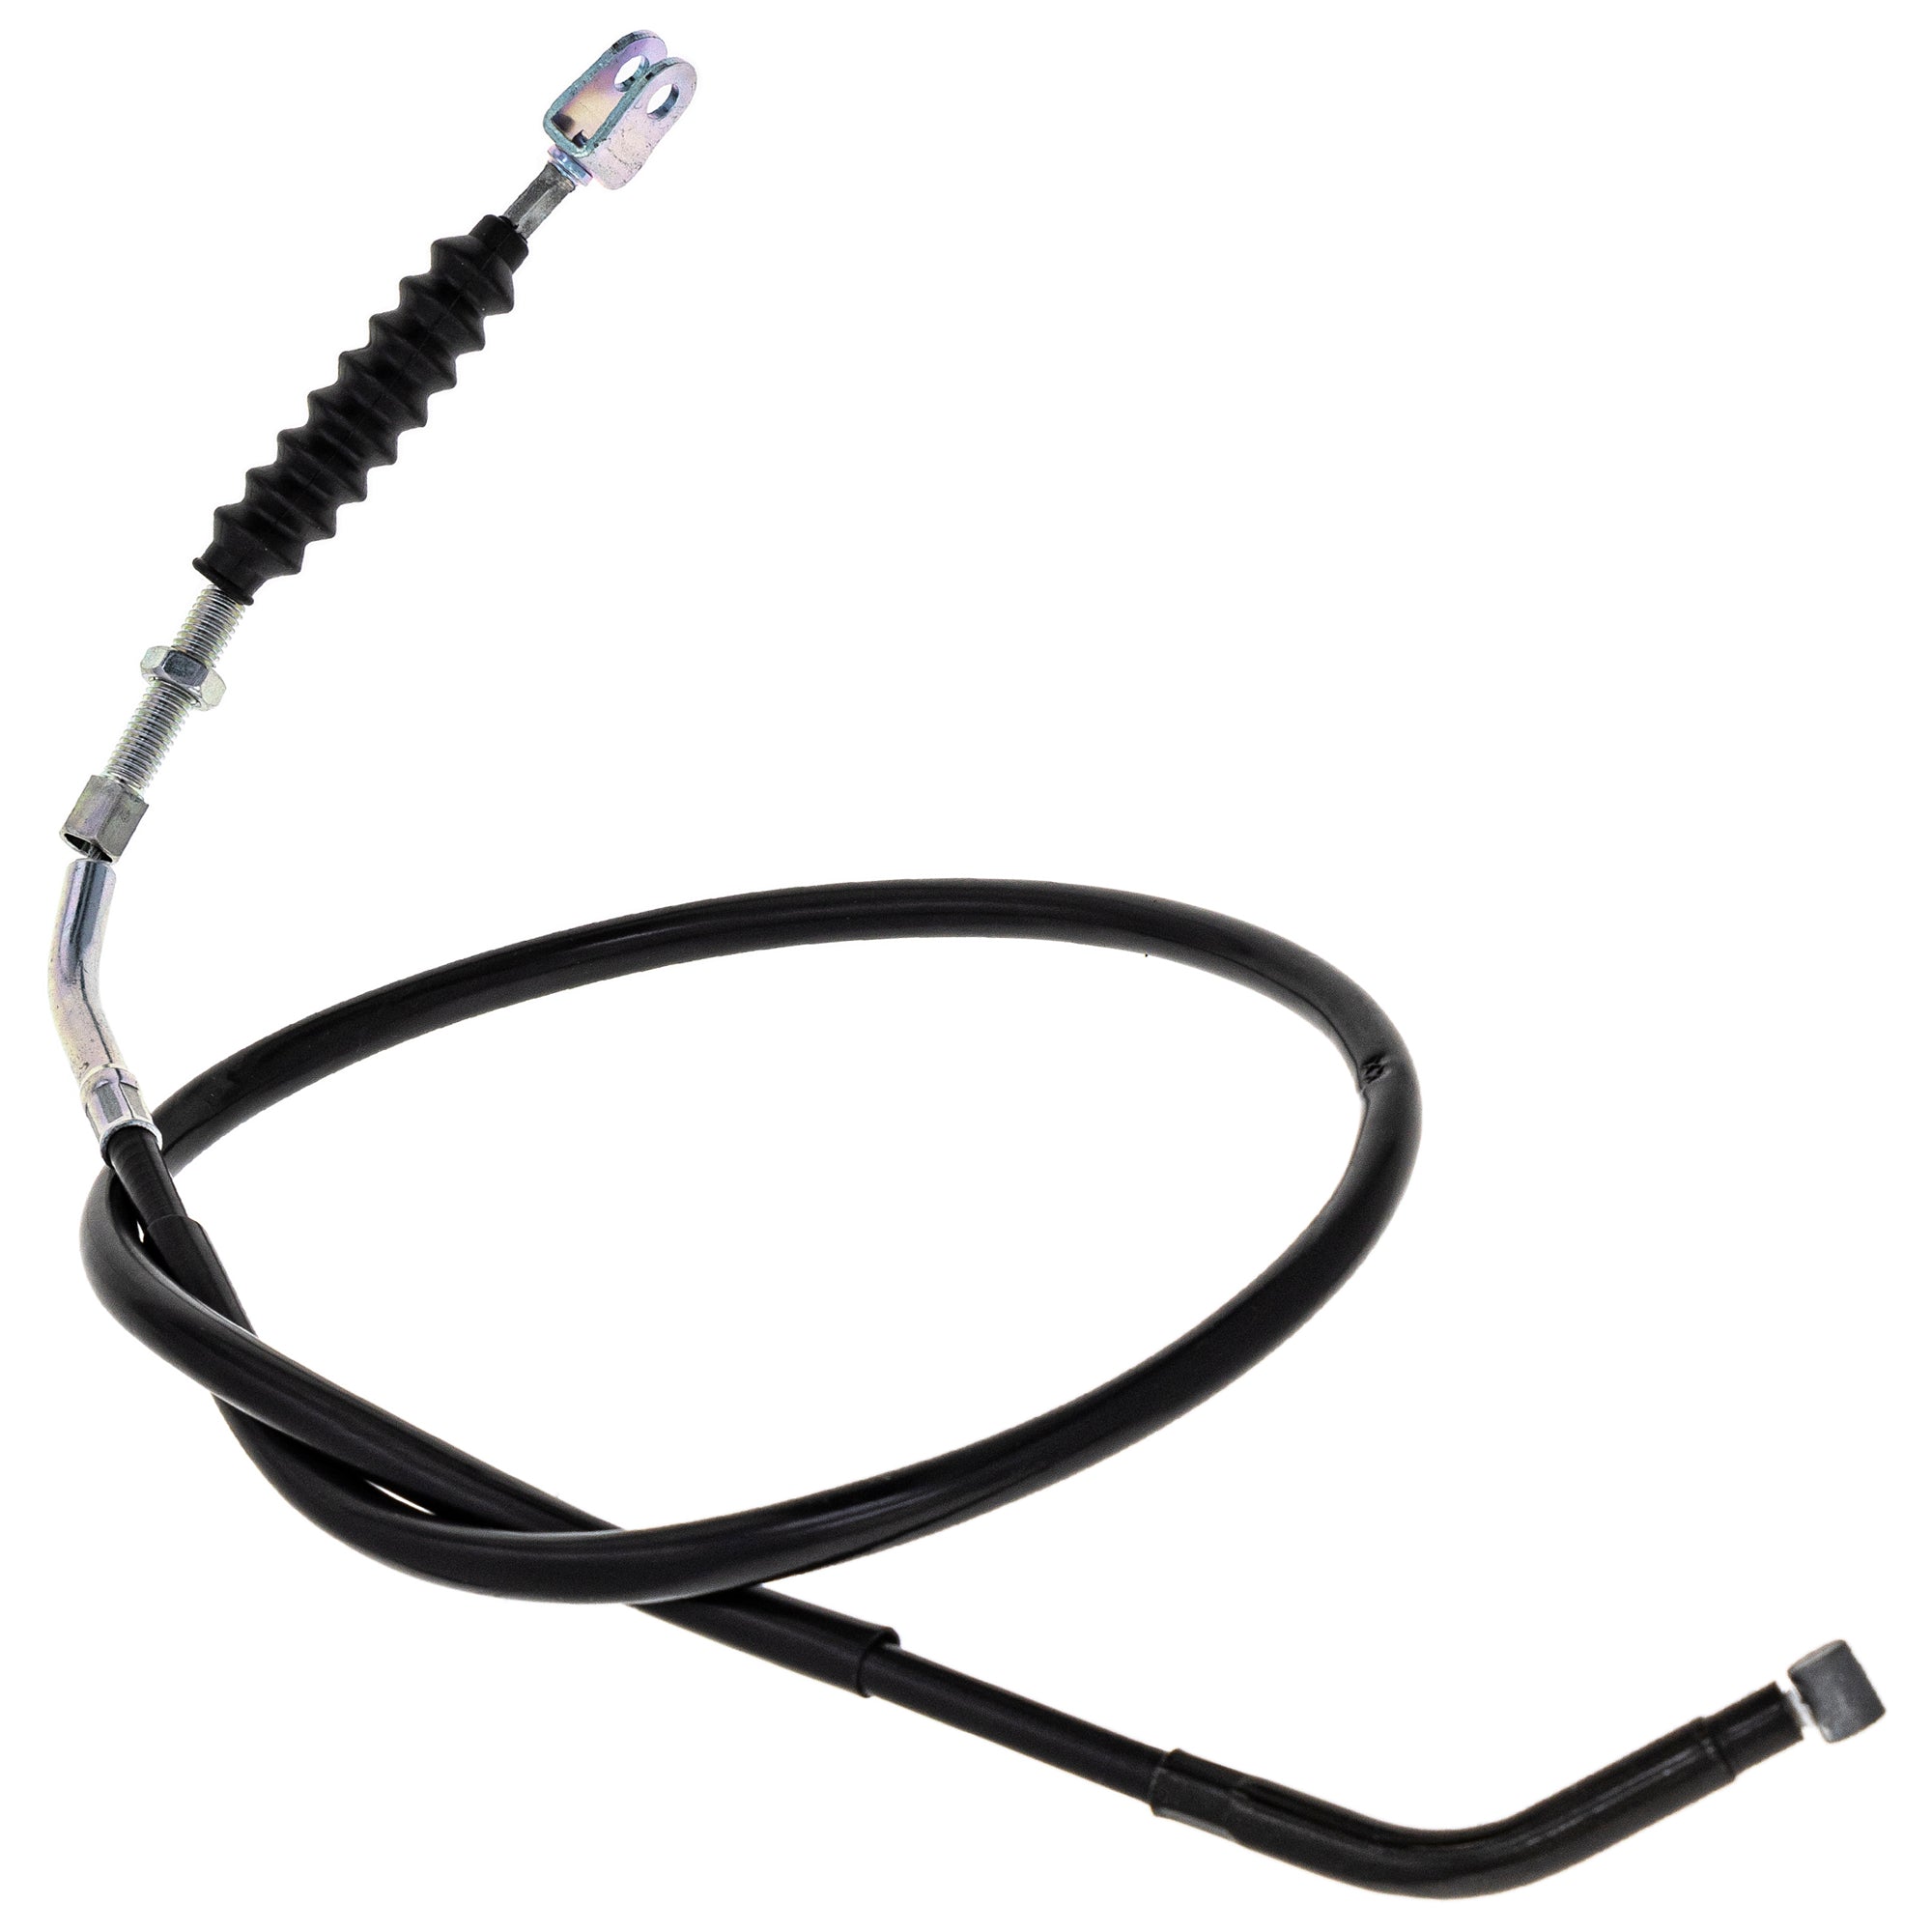 Clutch Cable for Suzuki GSXR600W 58200-17E00 Motorcycle